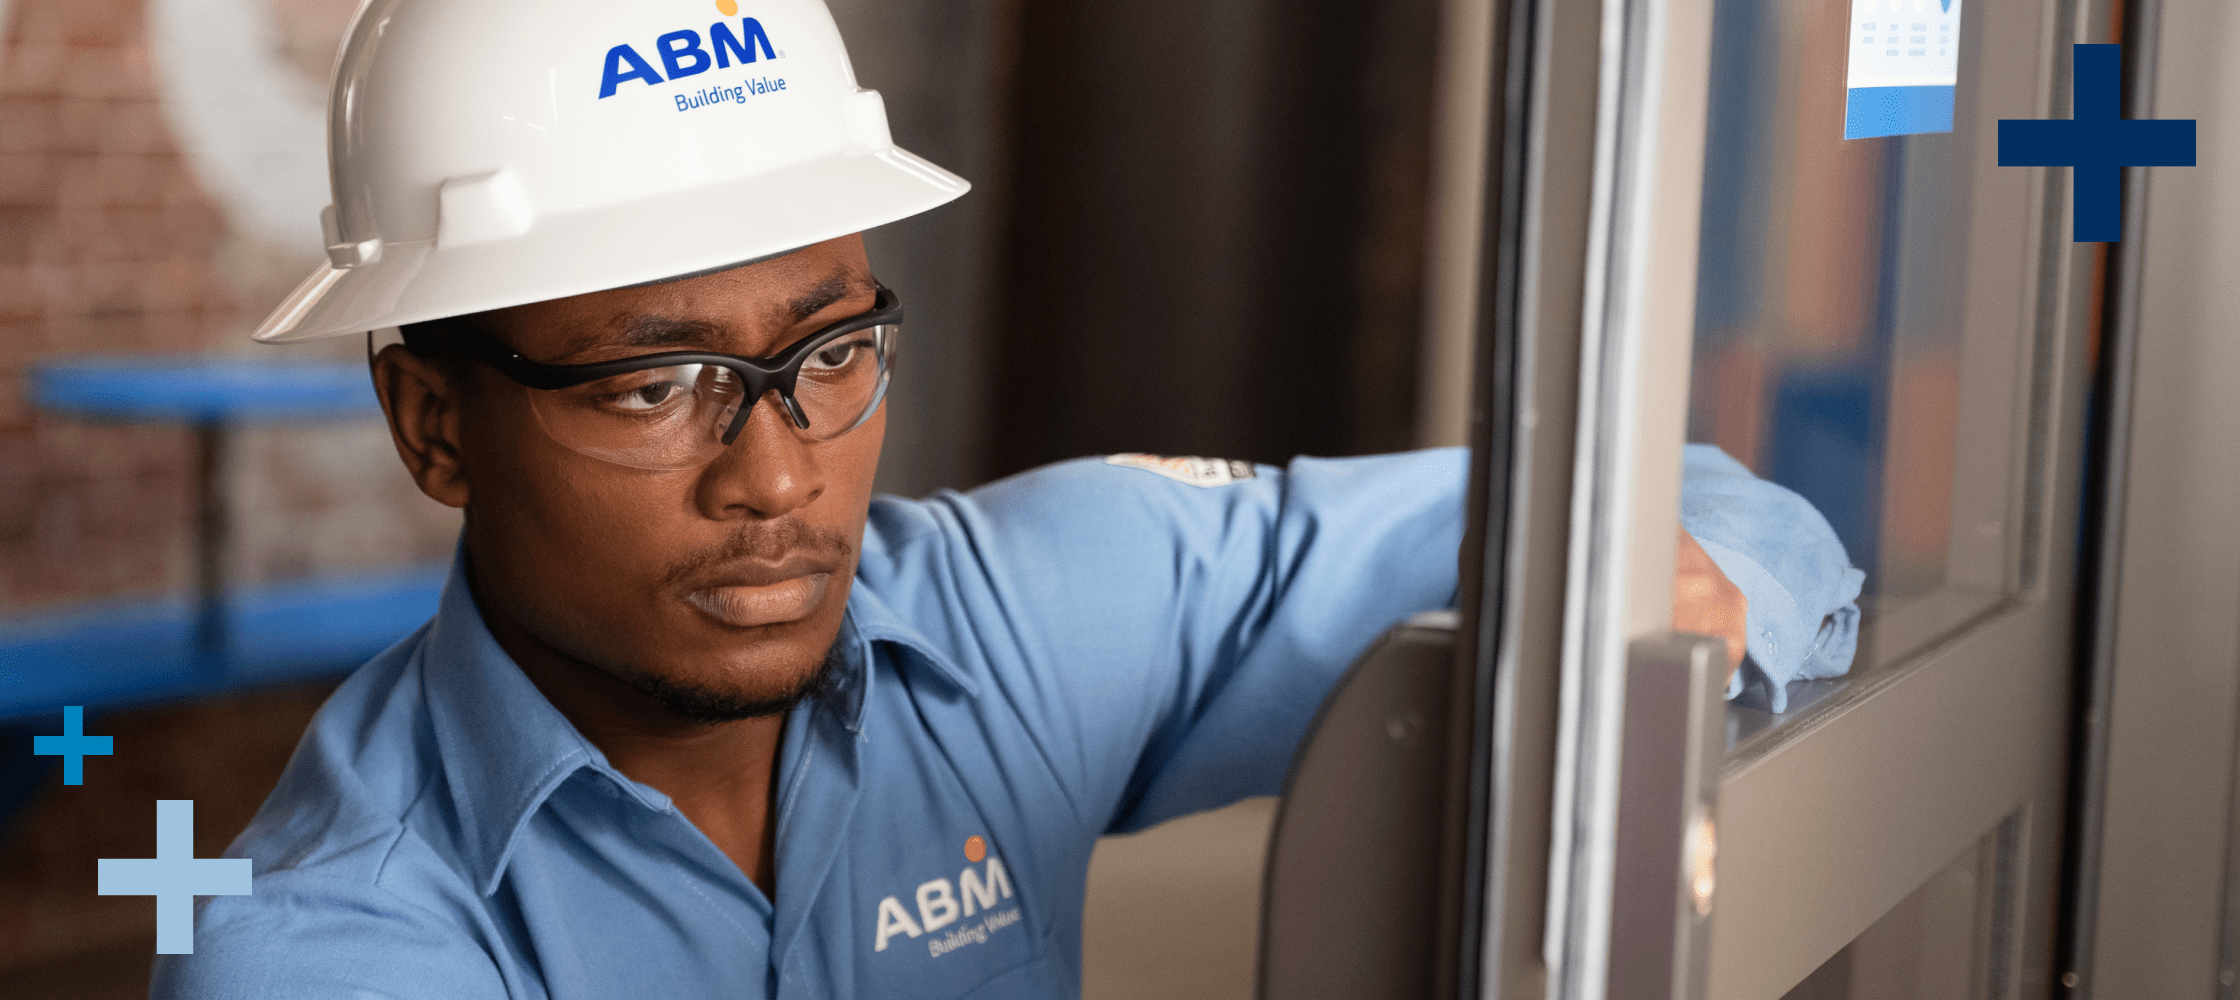 Male ABM engineer wearing a blue shirt and white hard hat inspecting a hotel door